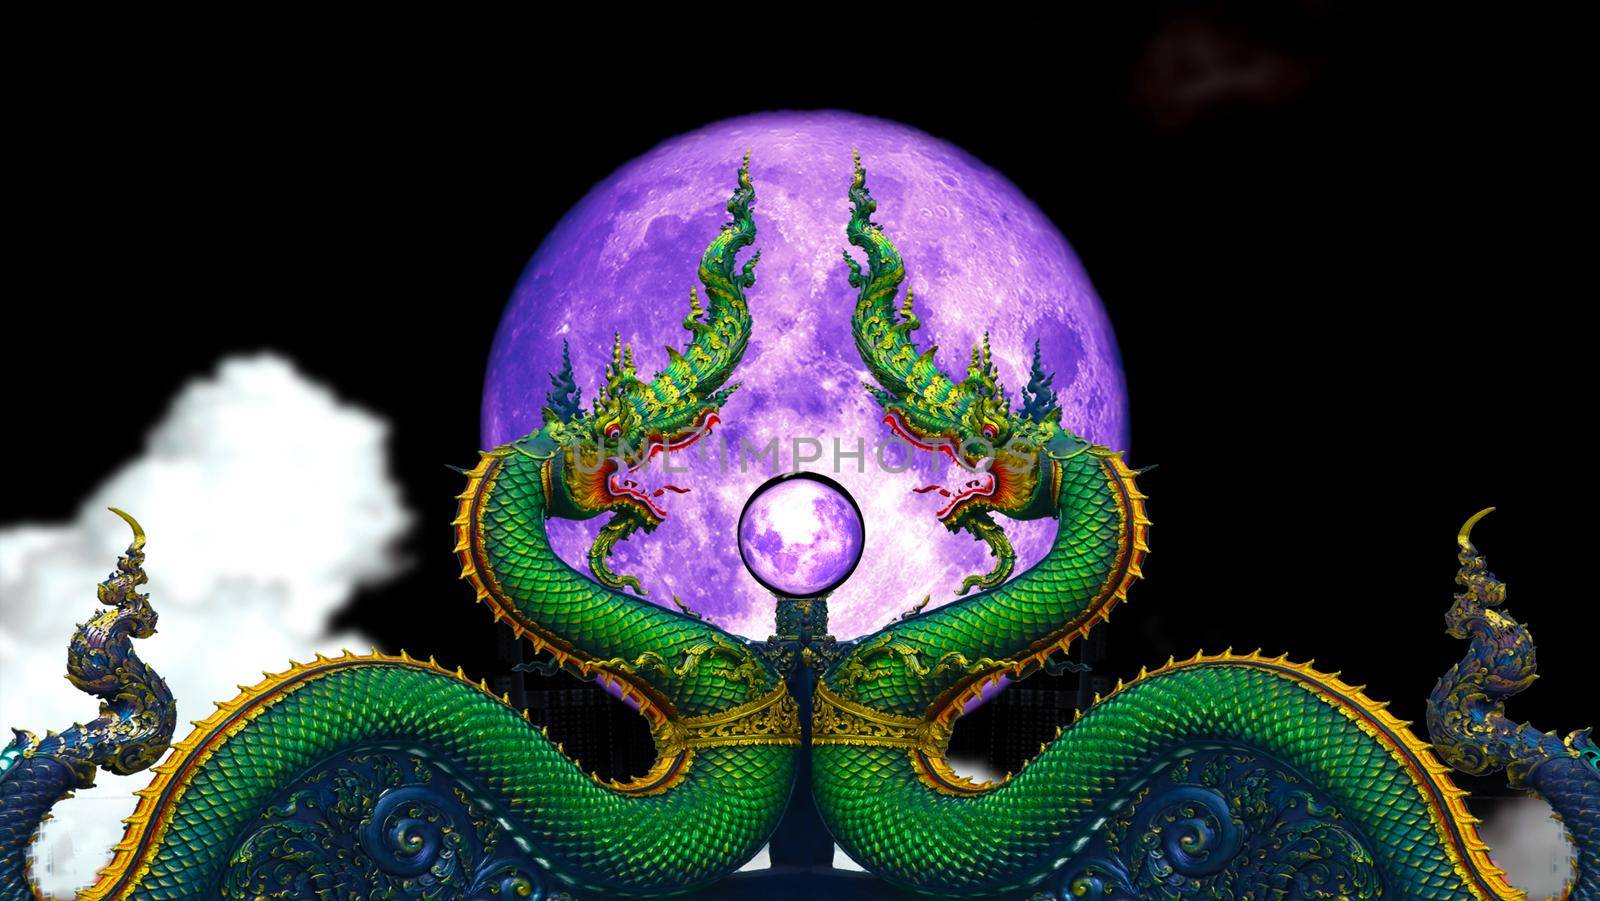 reflection violet moon and cloud on crystal ball and twin naga on the night sky time lapse by Darkfox